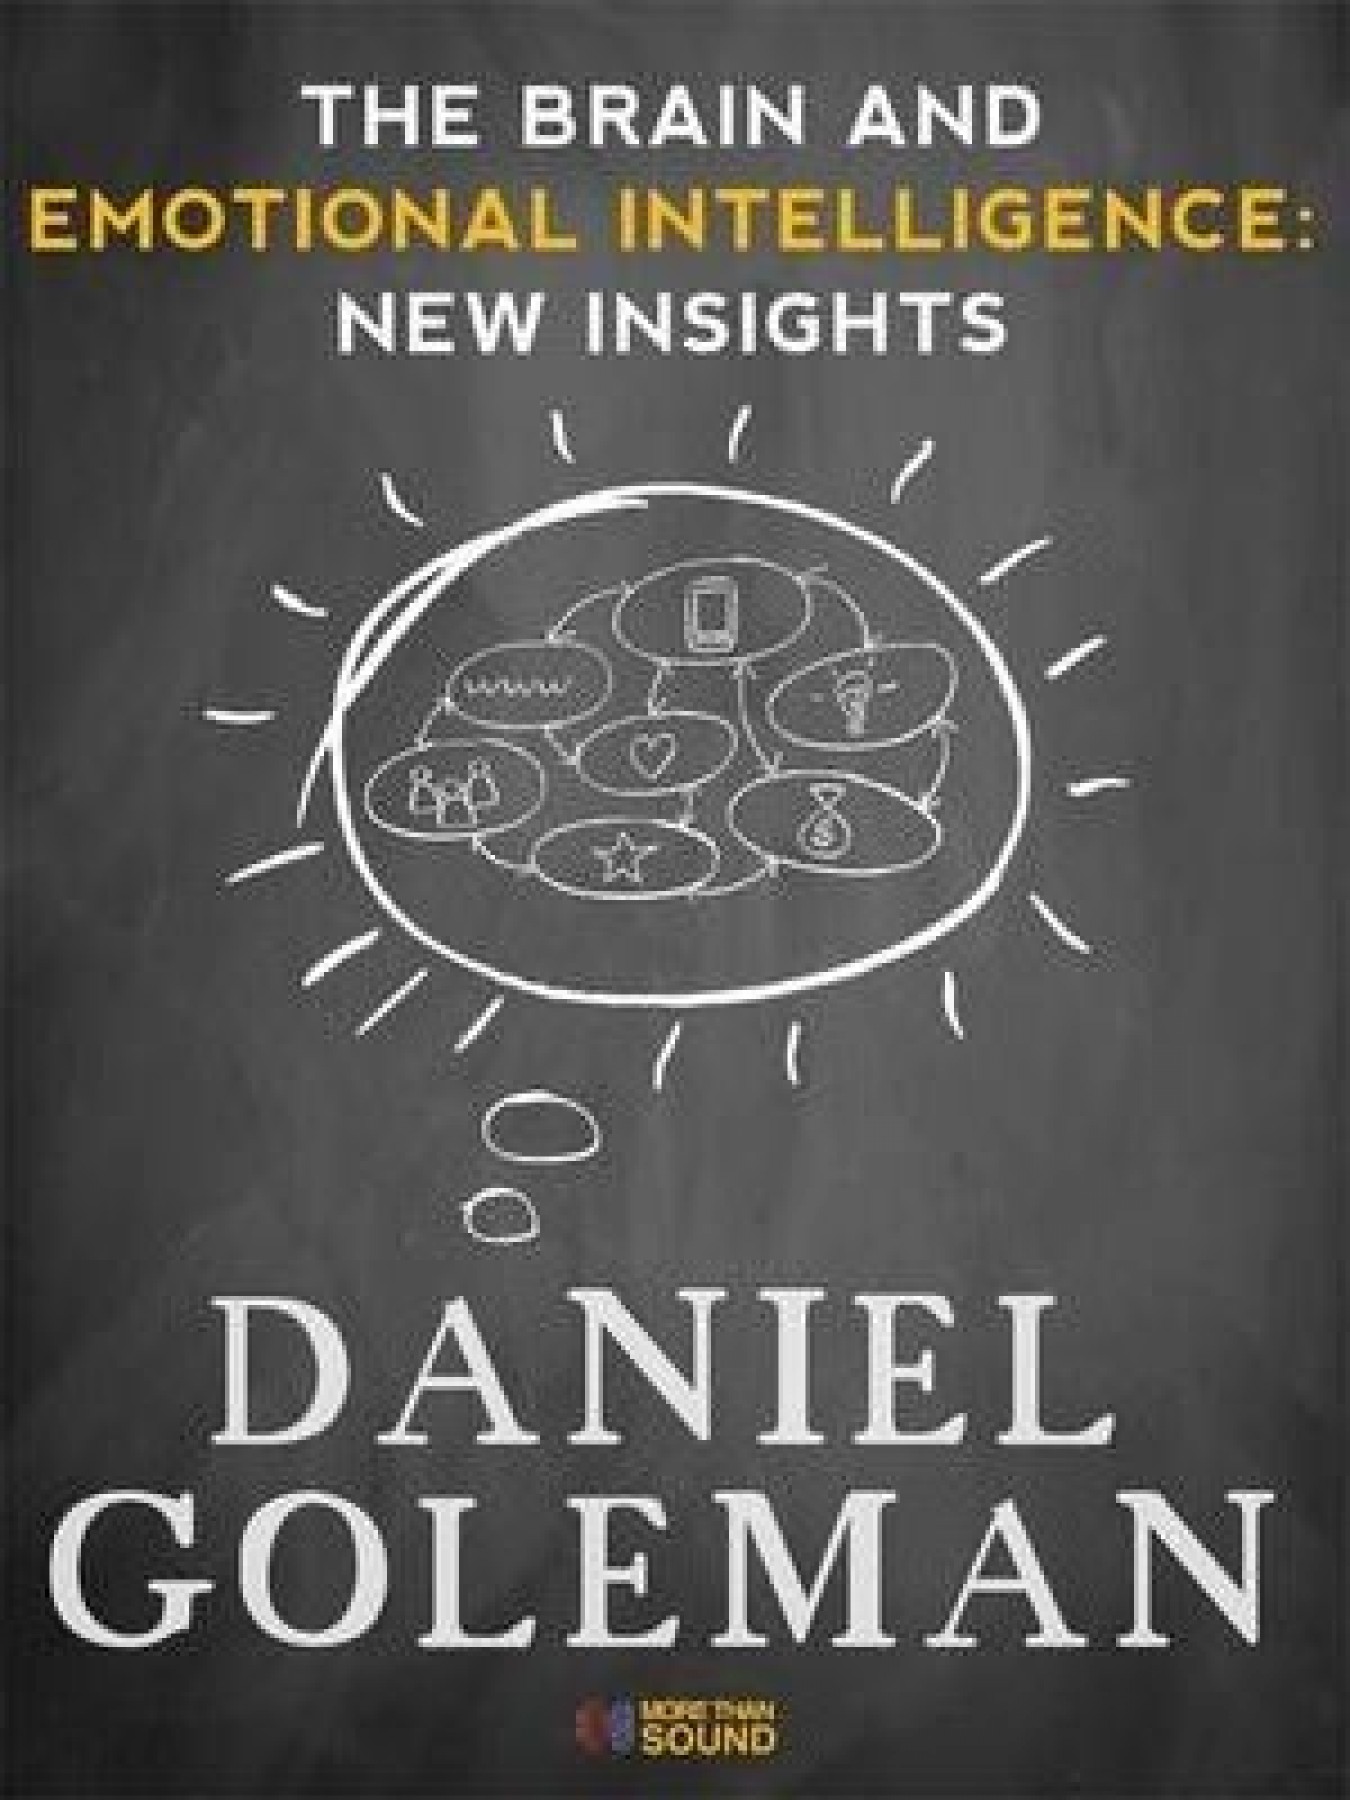 The brain and emotional intelligence: New insights